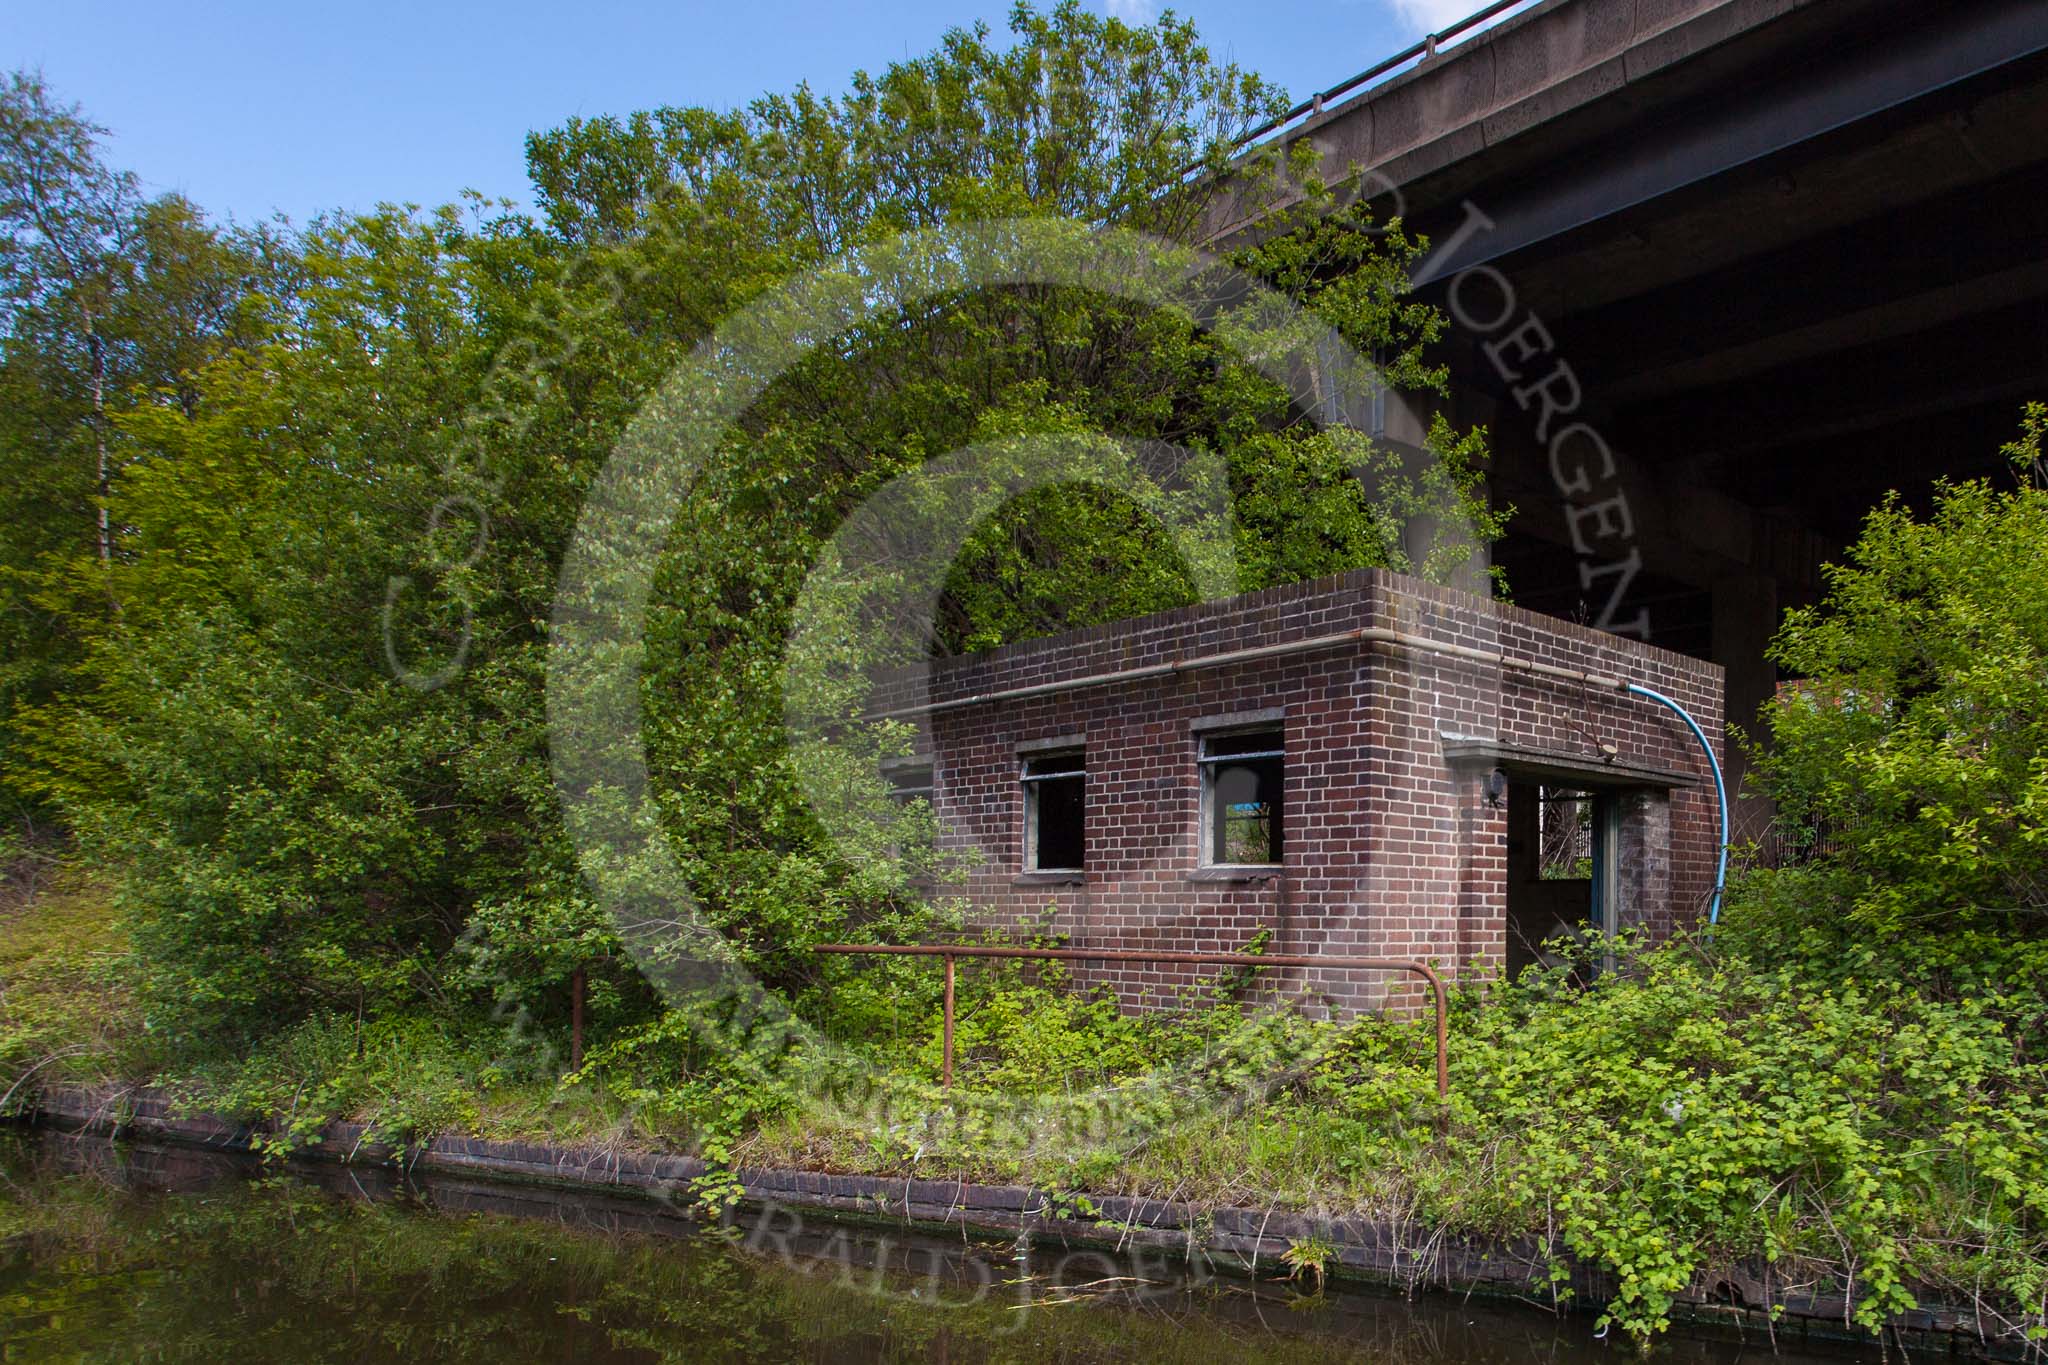 BCN Marathon Challenge 2013: Canalside building of the Summit Foundry (?) at the BCN Old Main Line between Summit Tunnel and Spon Lane Junction..
Birmingham Canal Navigation,


United Kingdom,
on 25 May 2013 at 09:44, image #119